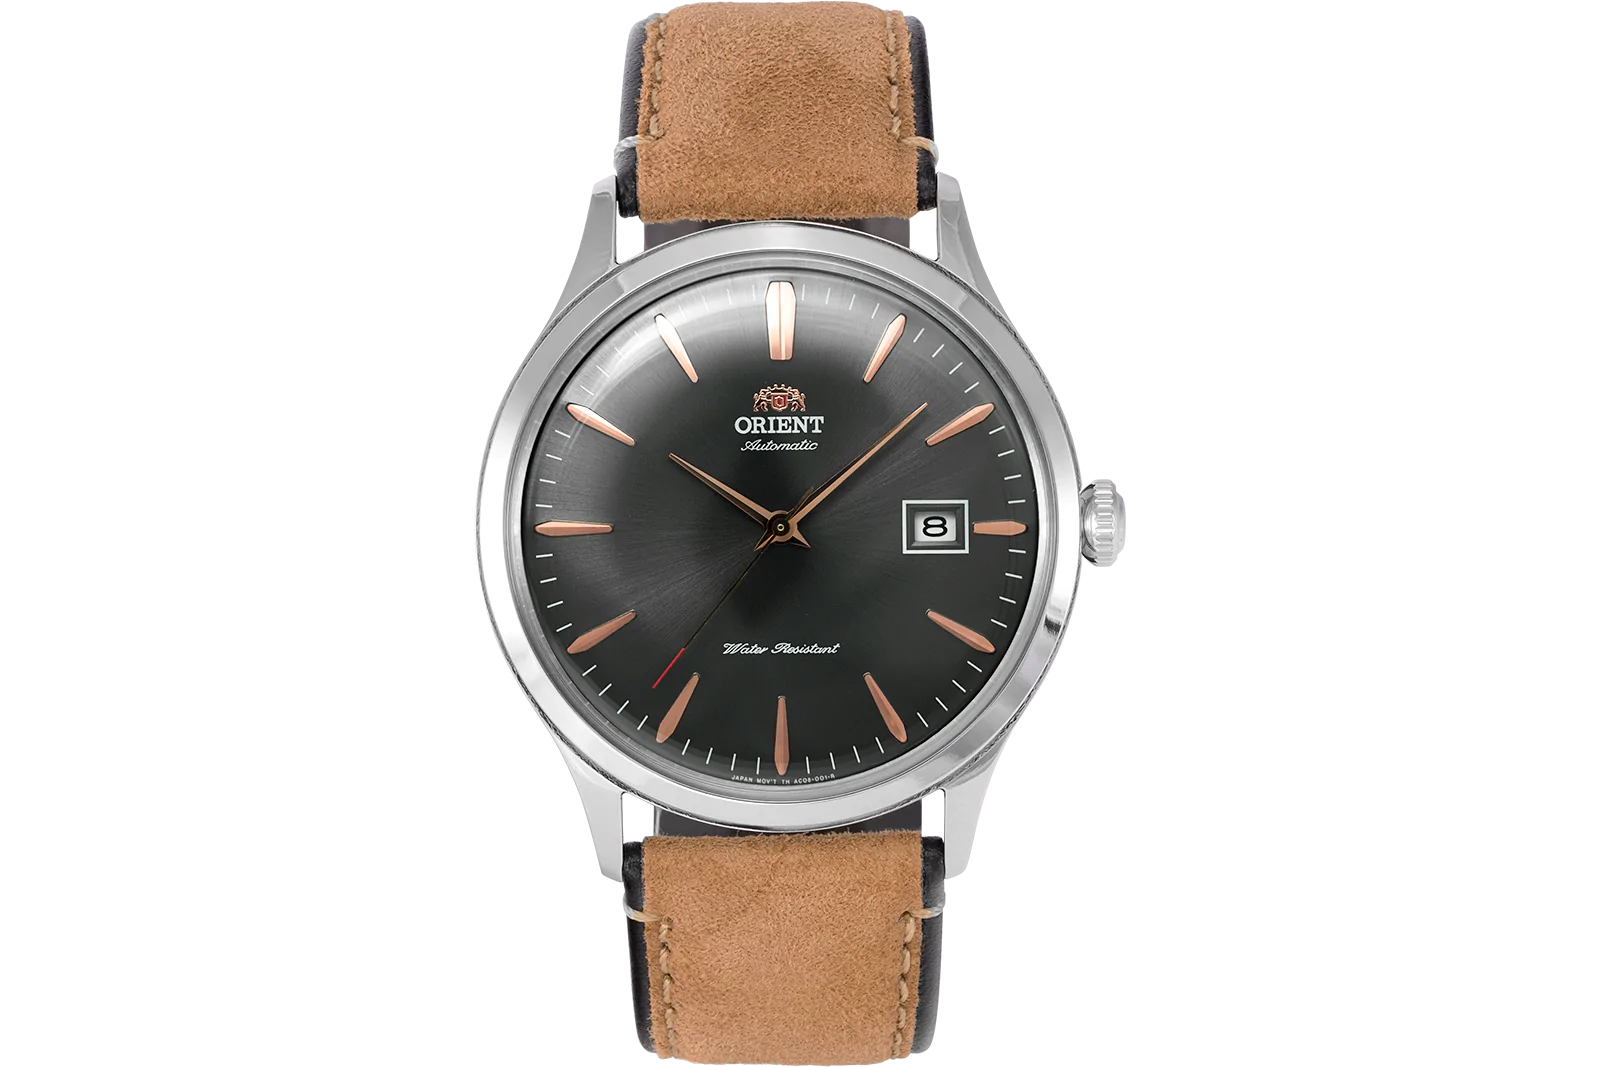 Orient FAC08003A0 Bambino Version 4 Classic Automatic Men's Watch - mzwatcheslk srilanka